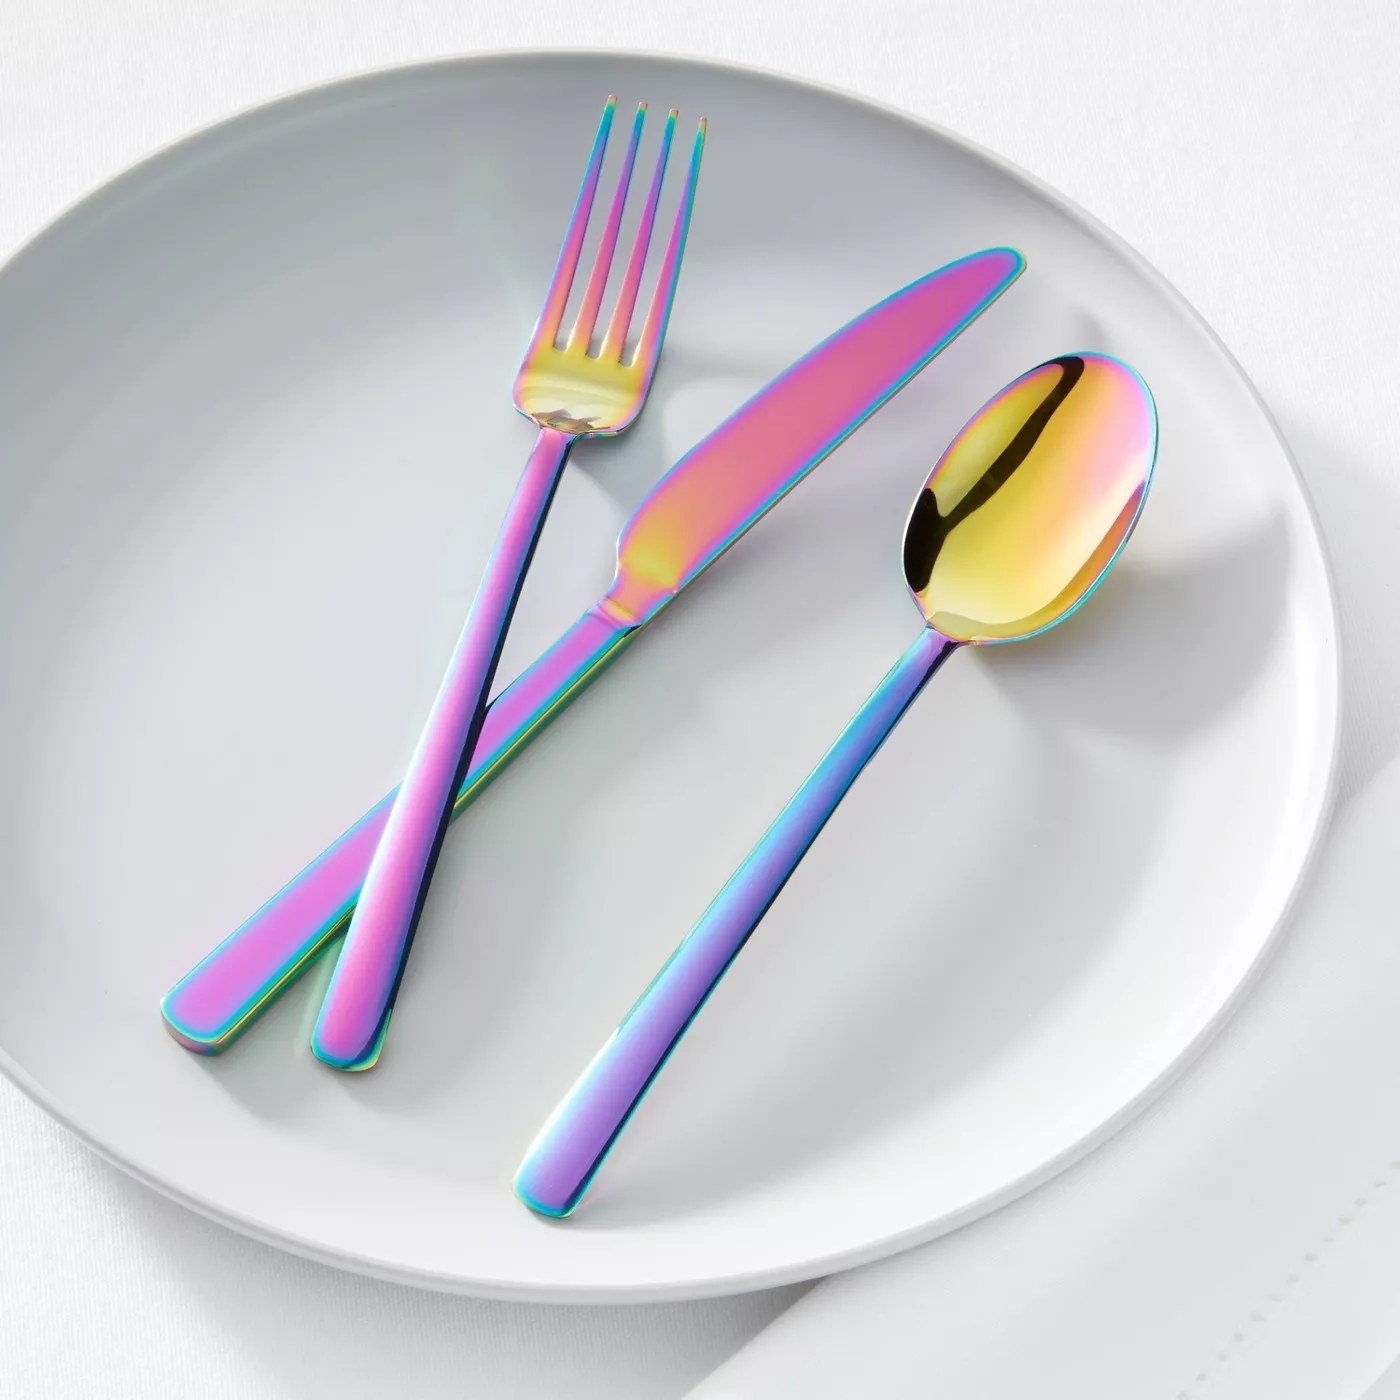 The rainbow silverware resting on a white plate